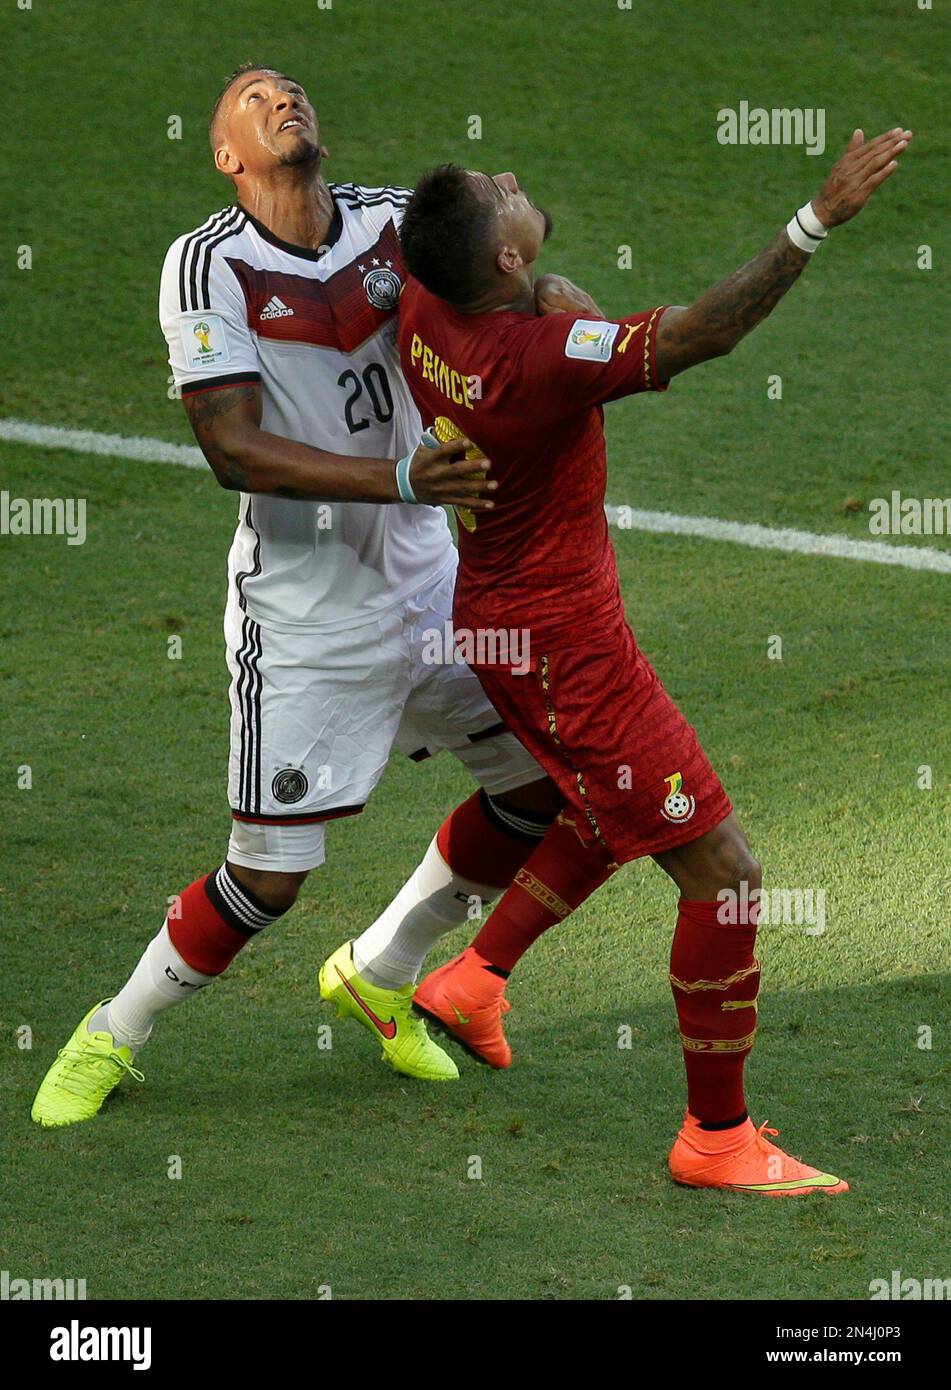 Germany's Jerome Boateng, left, and his half-borther Ghana's Kevin-Prince Boateng look up to the ball during the group G World Cup soccer match between Germany and Ghana at the Arena Castelao in Fortaleza, Brazil, Saturday, June 21, 2014. (AP Photo/Themba Hadebe) Stock Photo